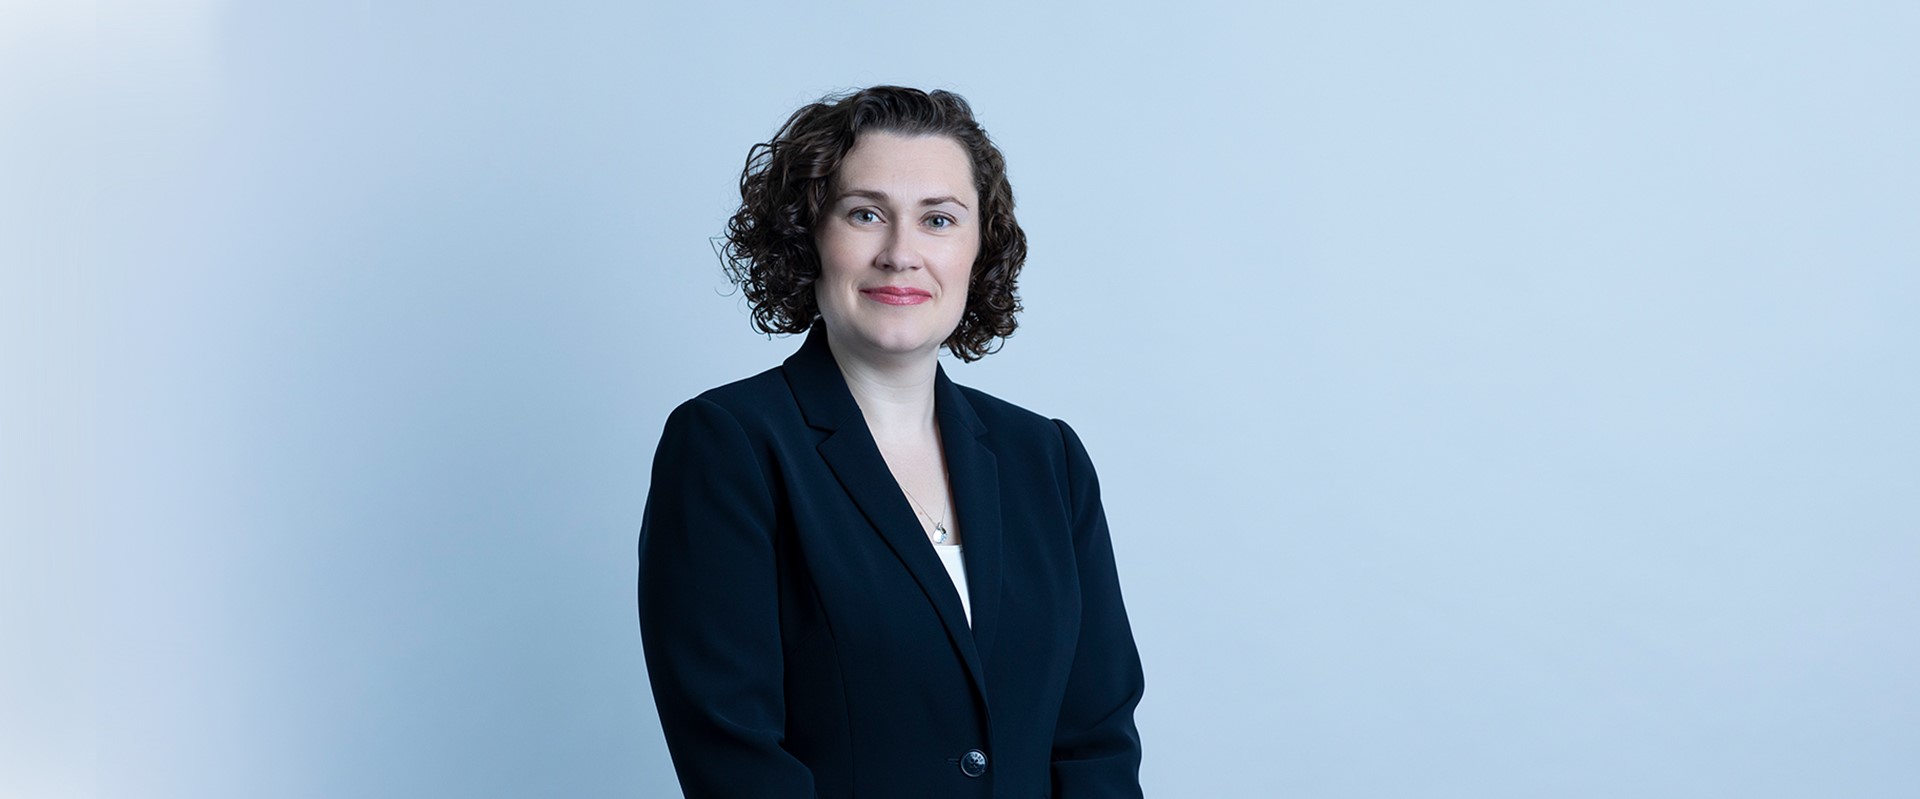 Aisling Kelly - Solicitor at Sherrards